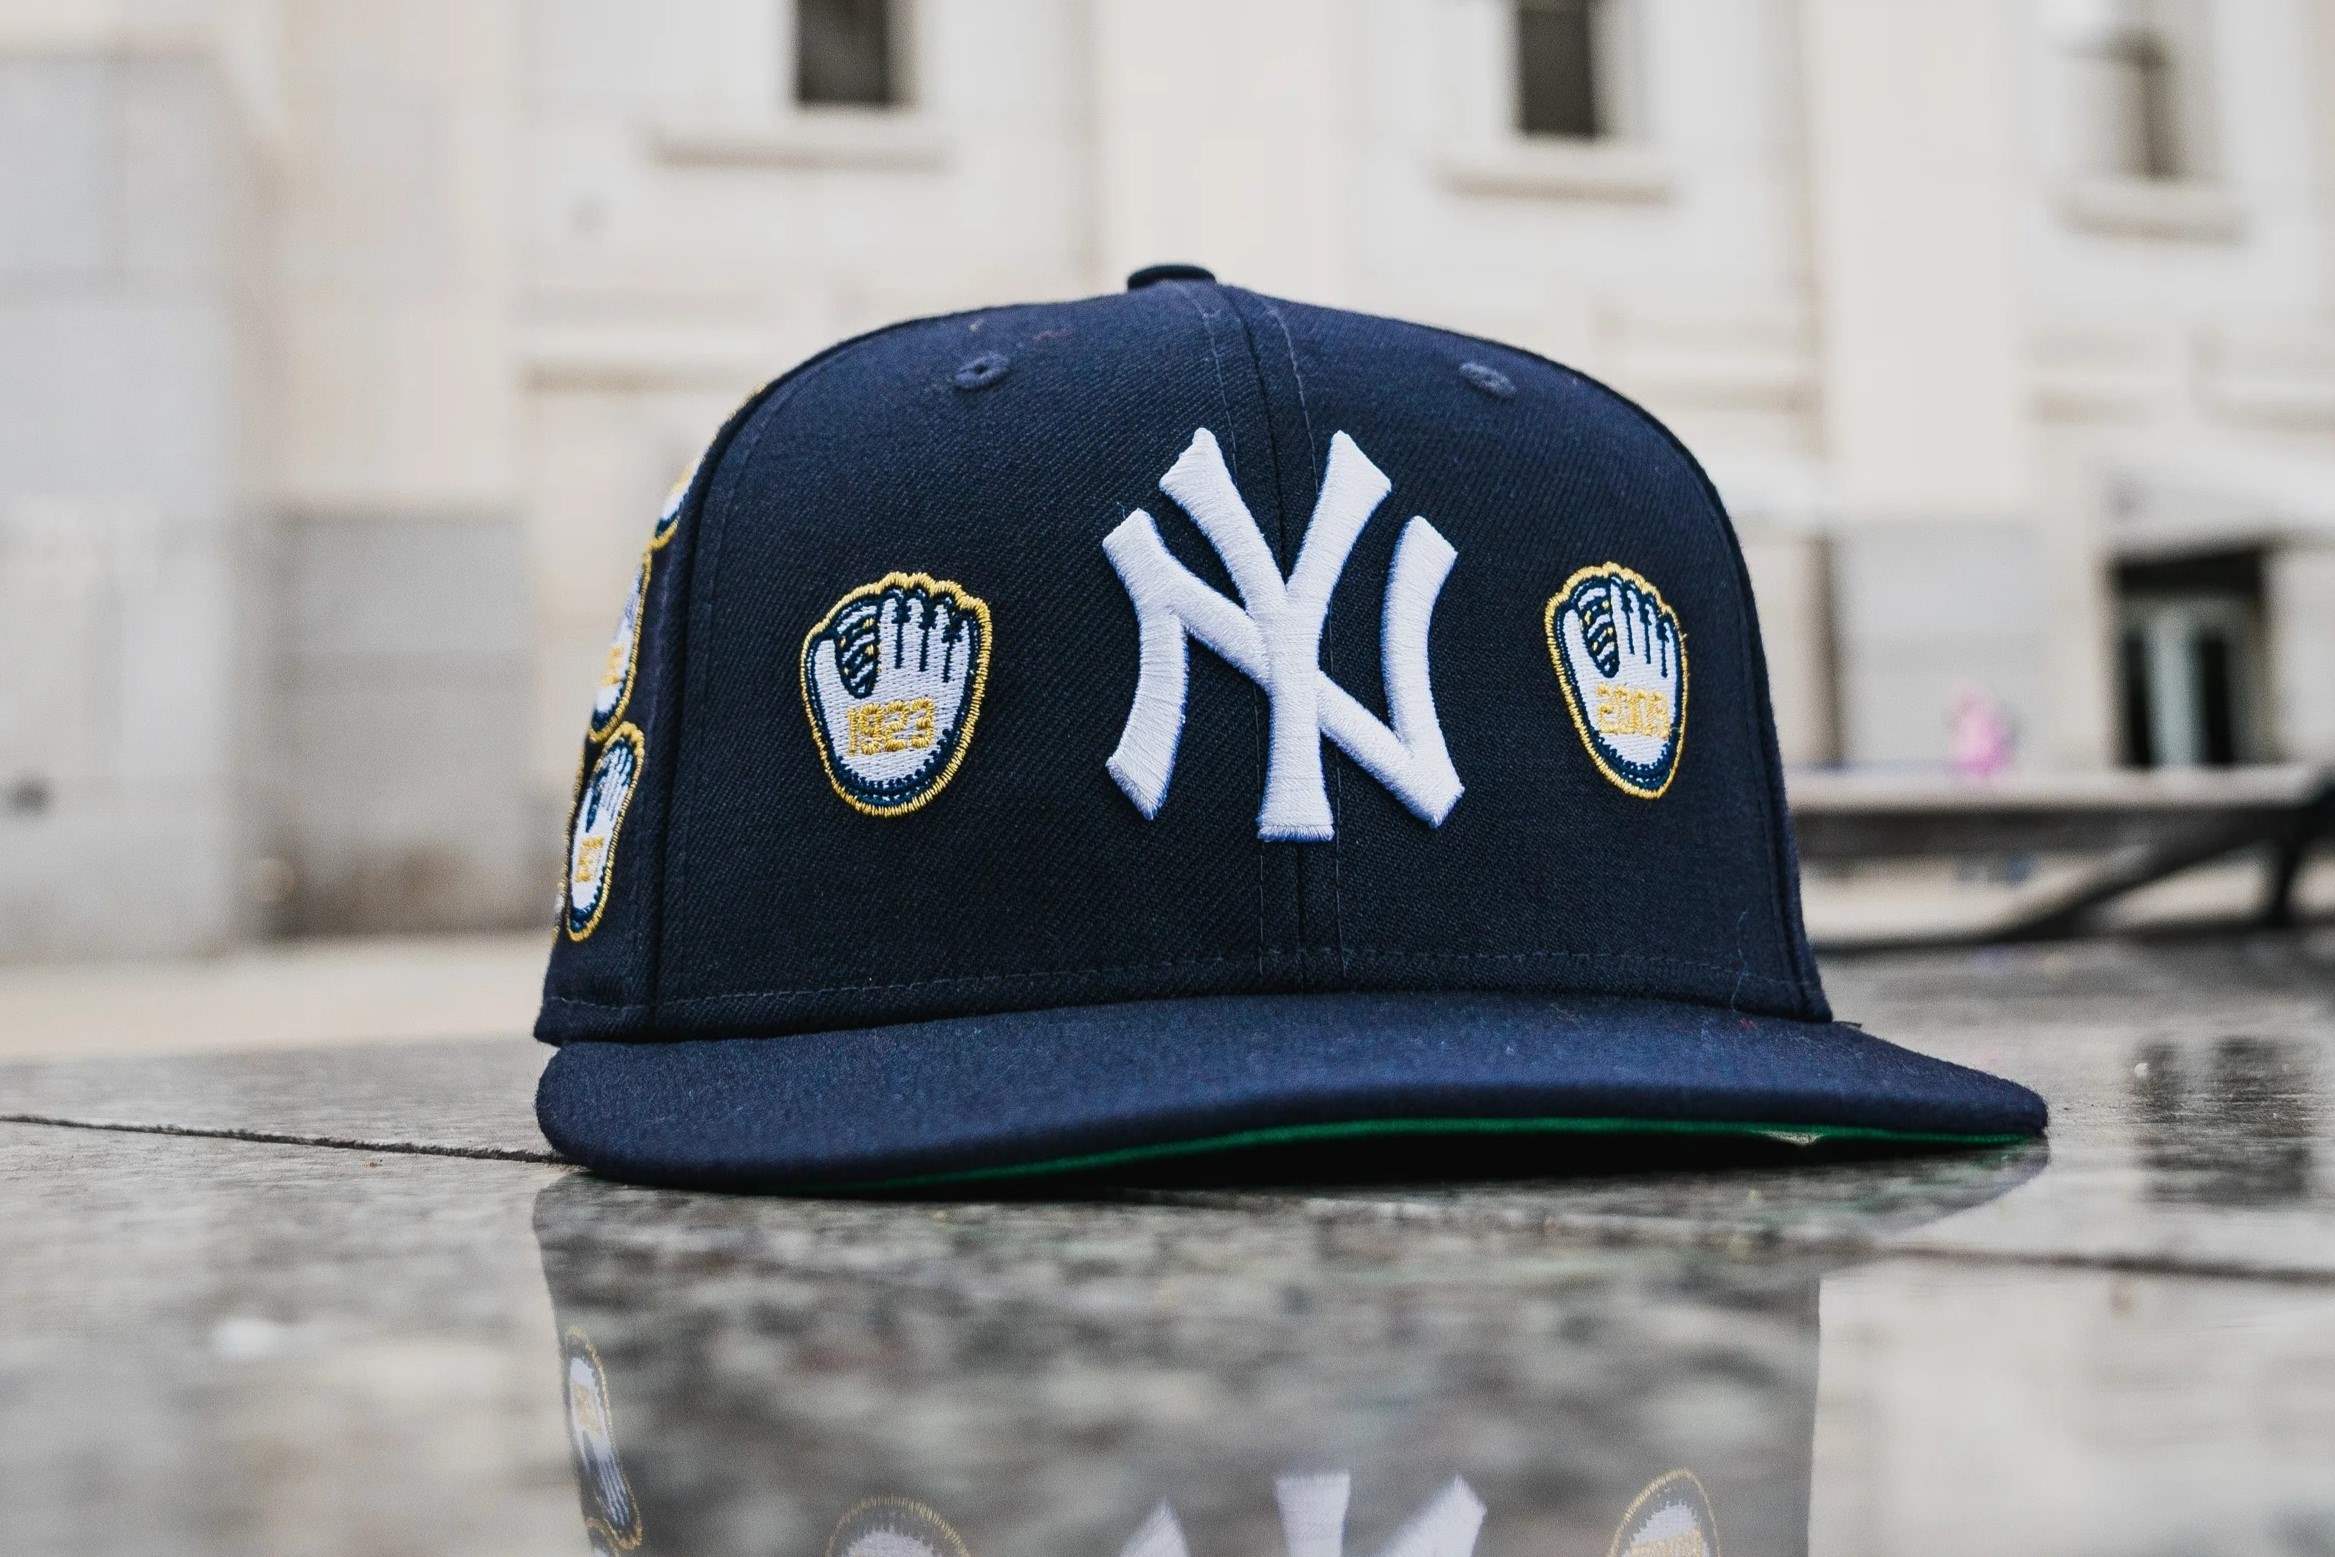 Amazing Hack To Shrink Your New Era Baseball Cap In Minutes!